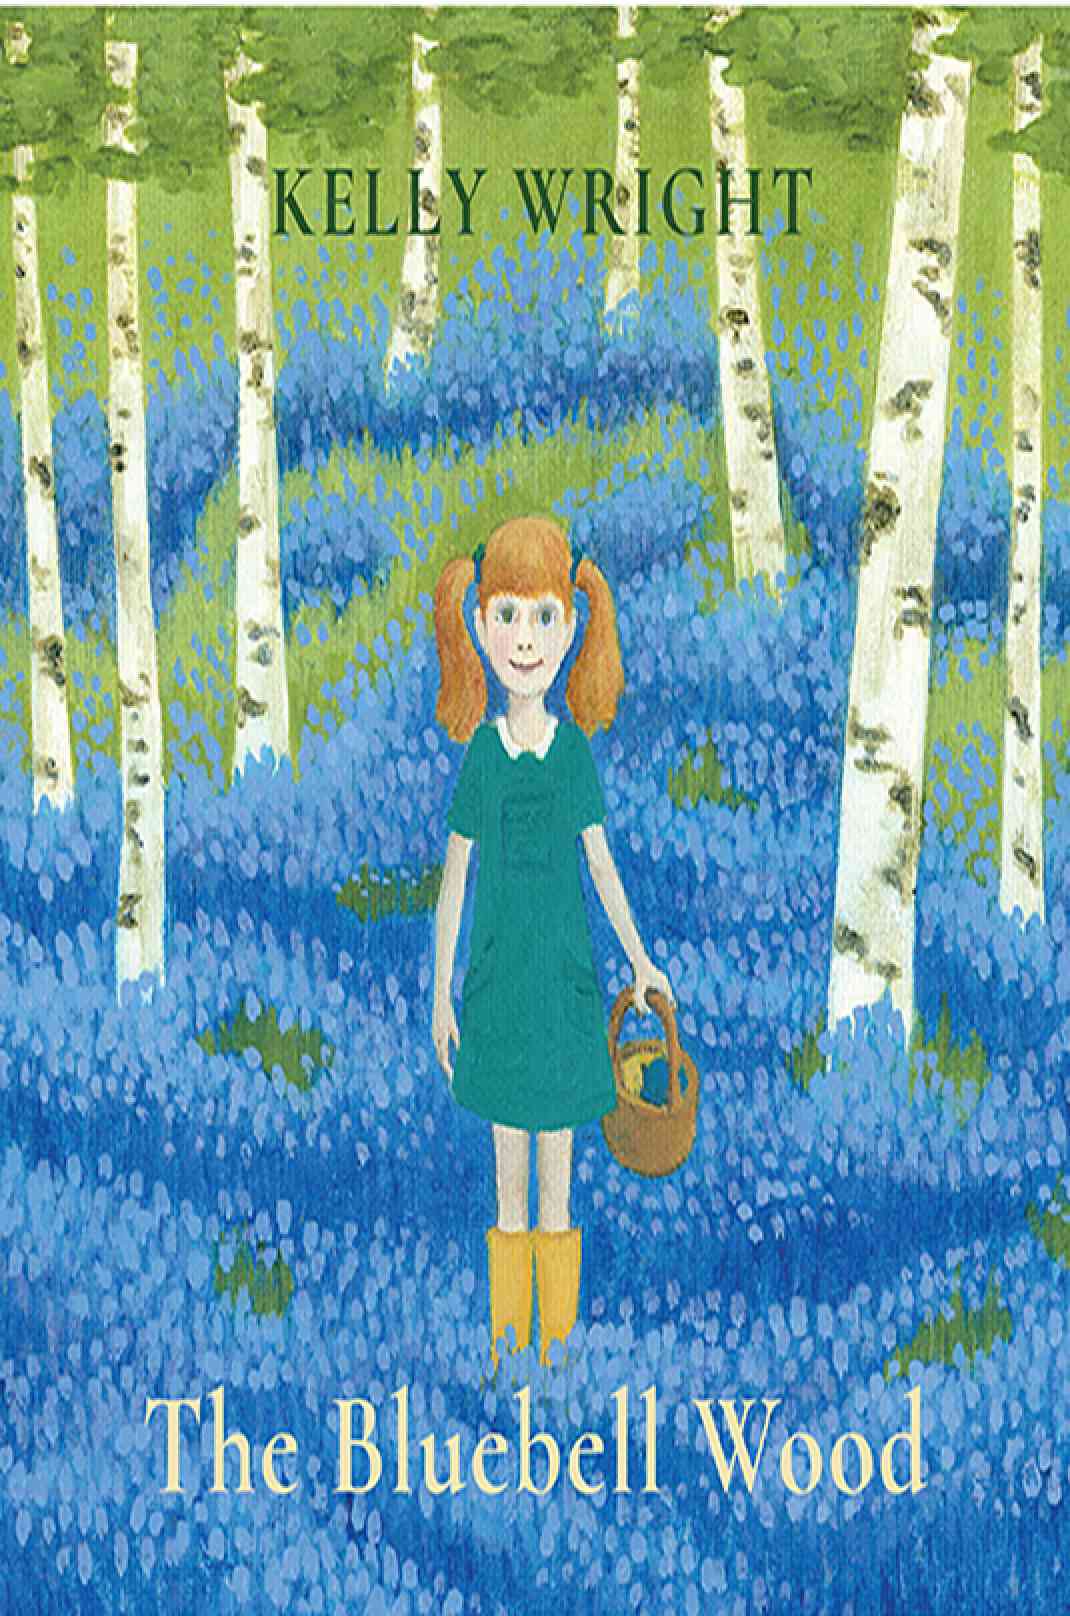 ‘The Bluebell Wood’ gets a review by John Gerry